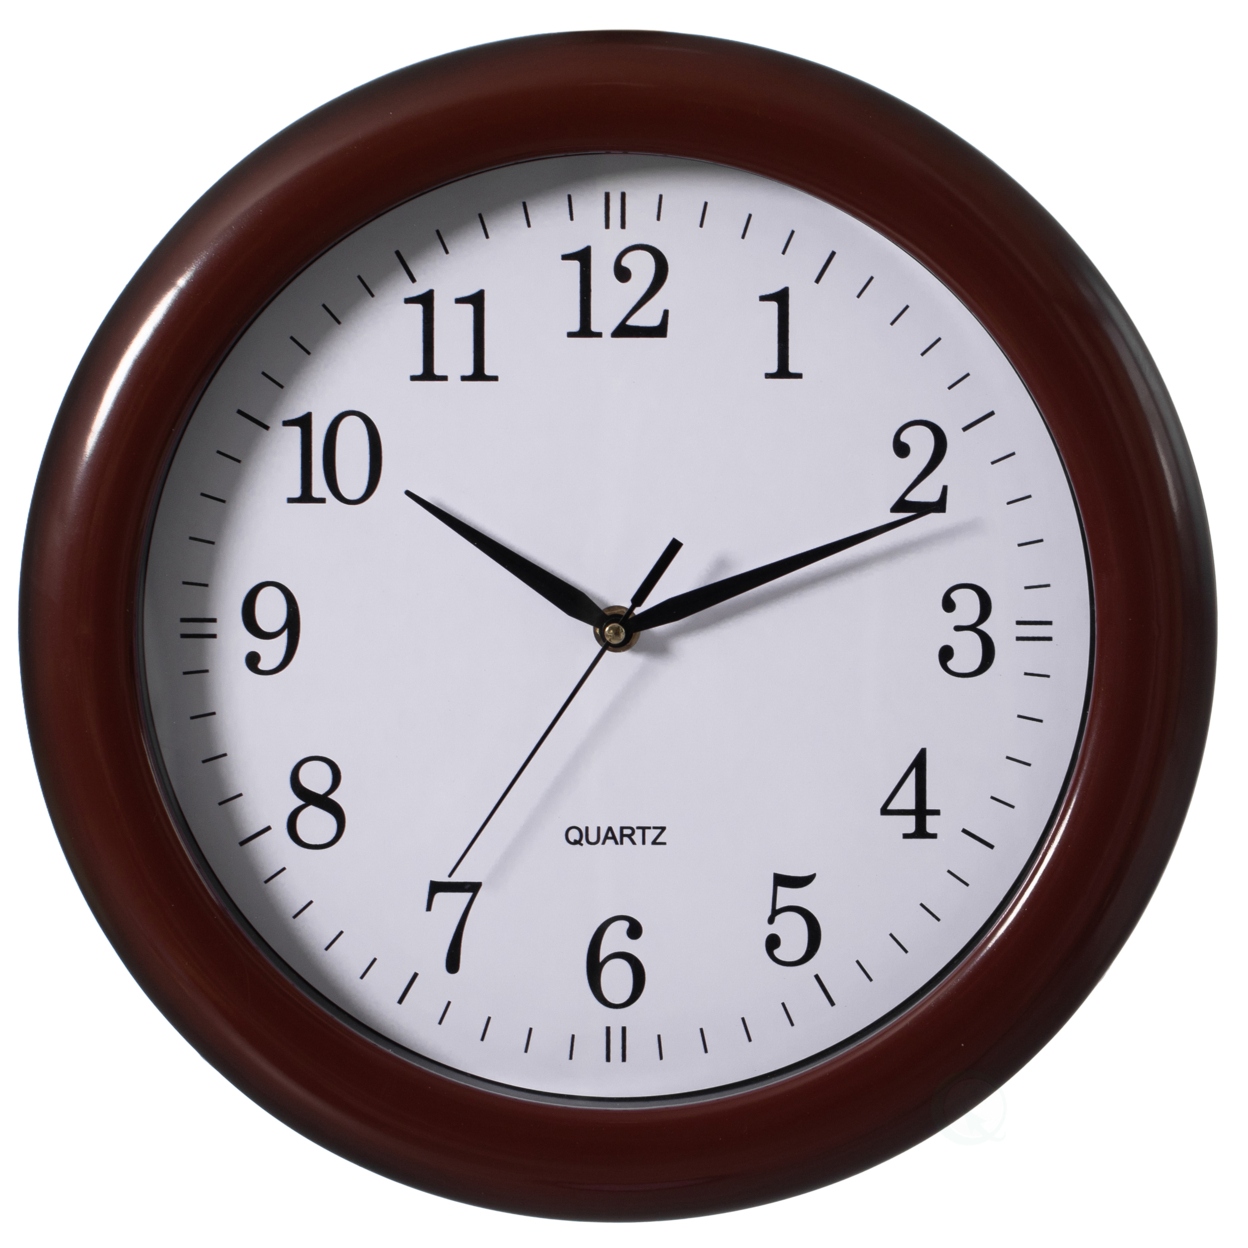 Decorative Classic Round Wall Clock For Living Room, Kitchen, Dining Room, Plastic - Brown